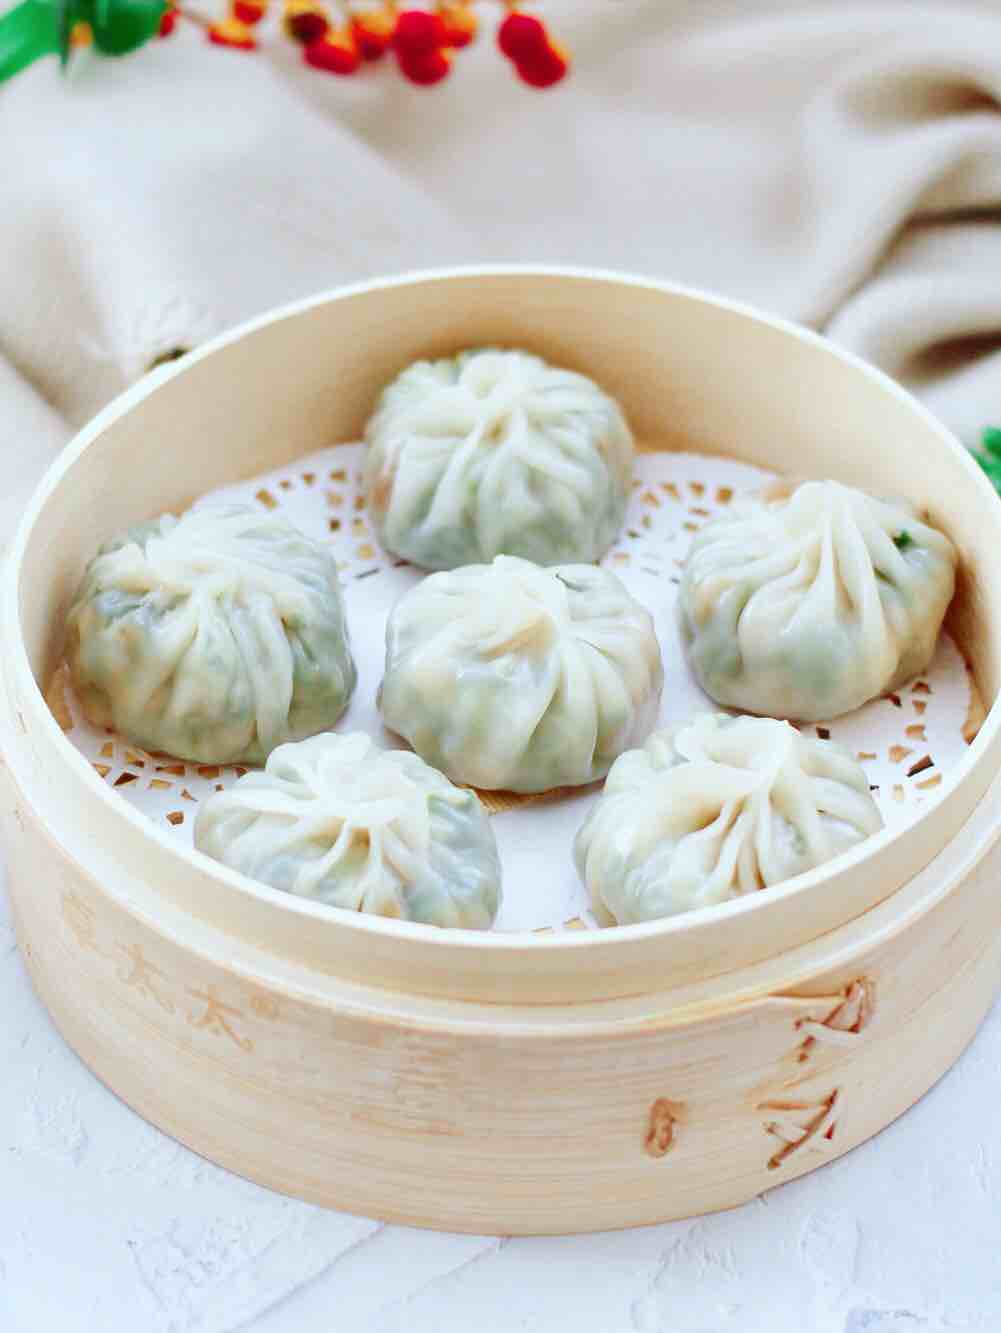 Steamed Buns with Pork and Haw Sauce